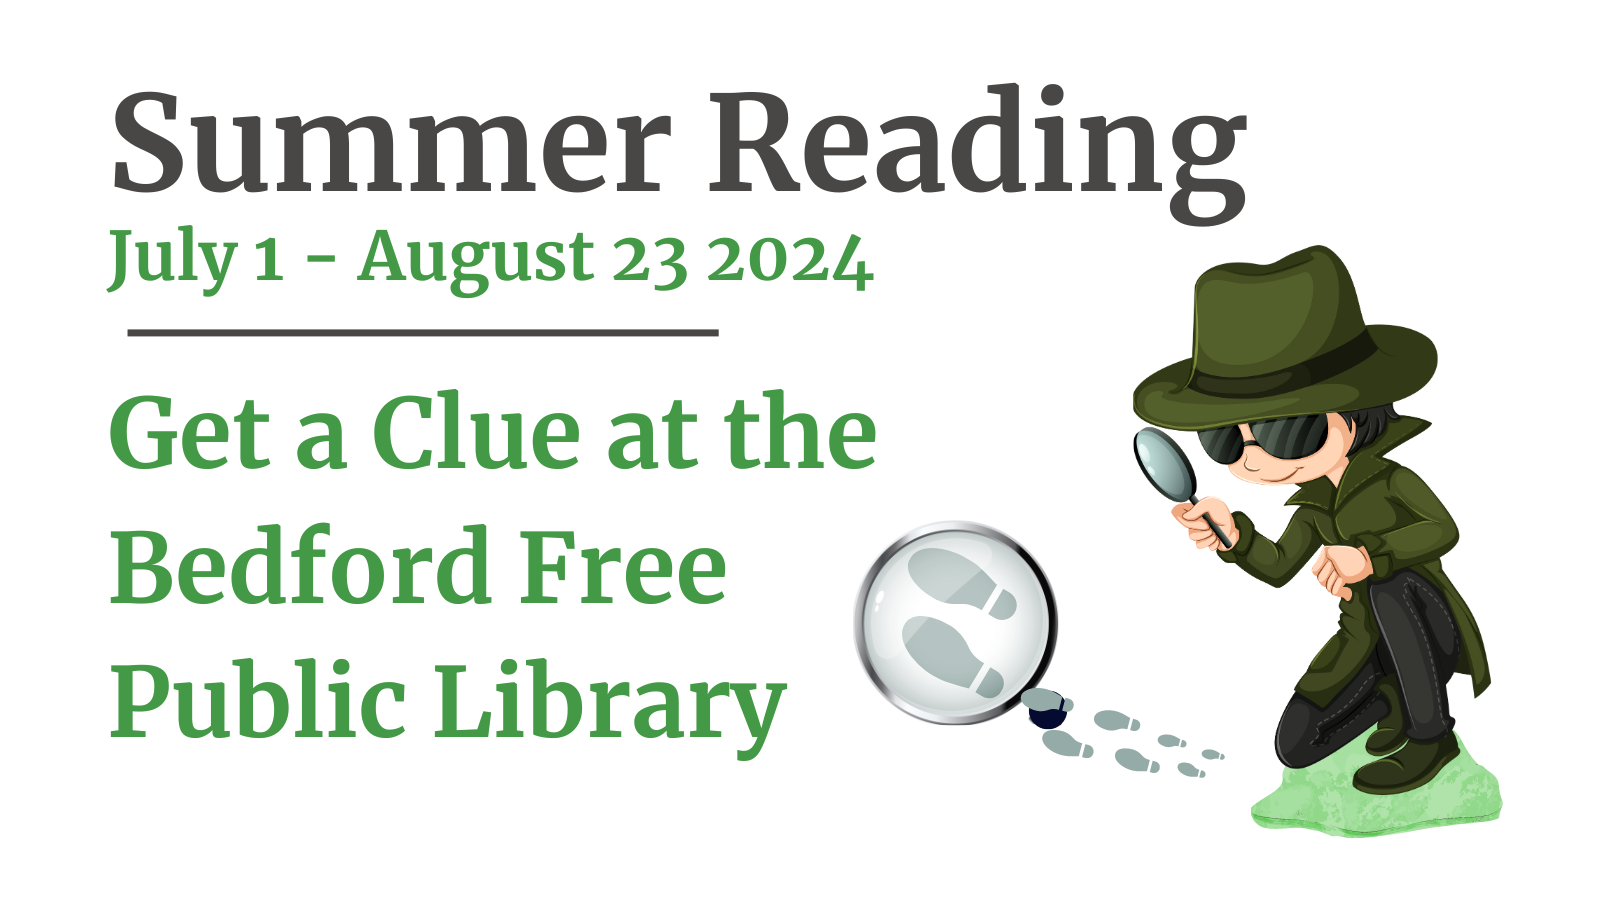 Banner with cartoon detective wearing green holding a magnifying glass looking at footprints Text reads "summer Reading July 1 - August 23 2024 Get a Clue at the Bedford Free Public Library"